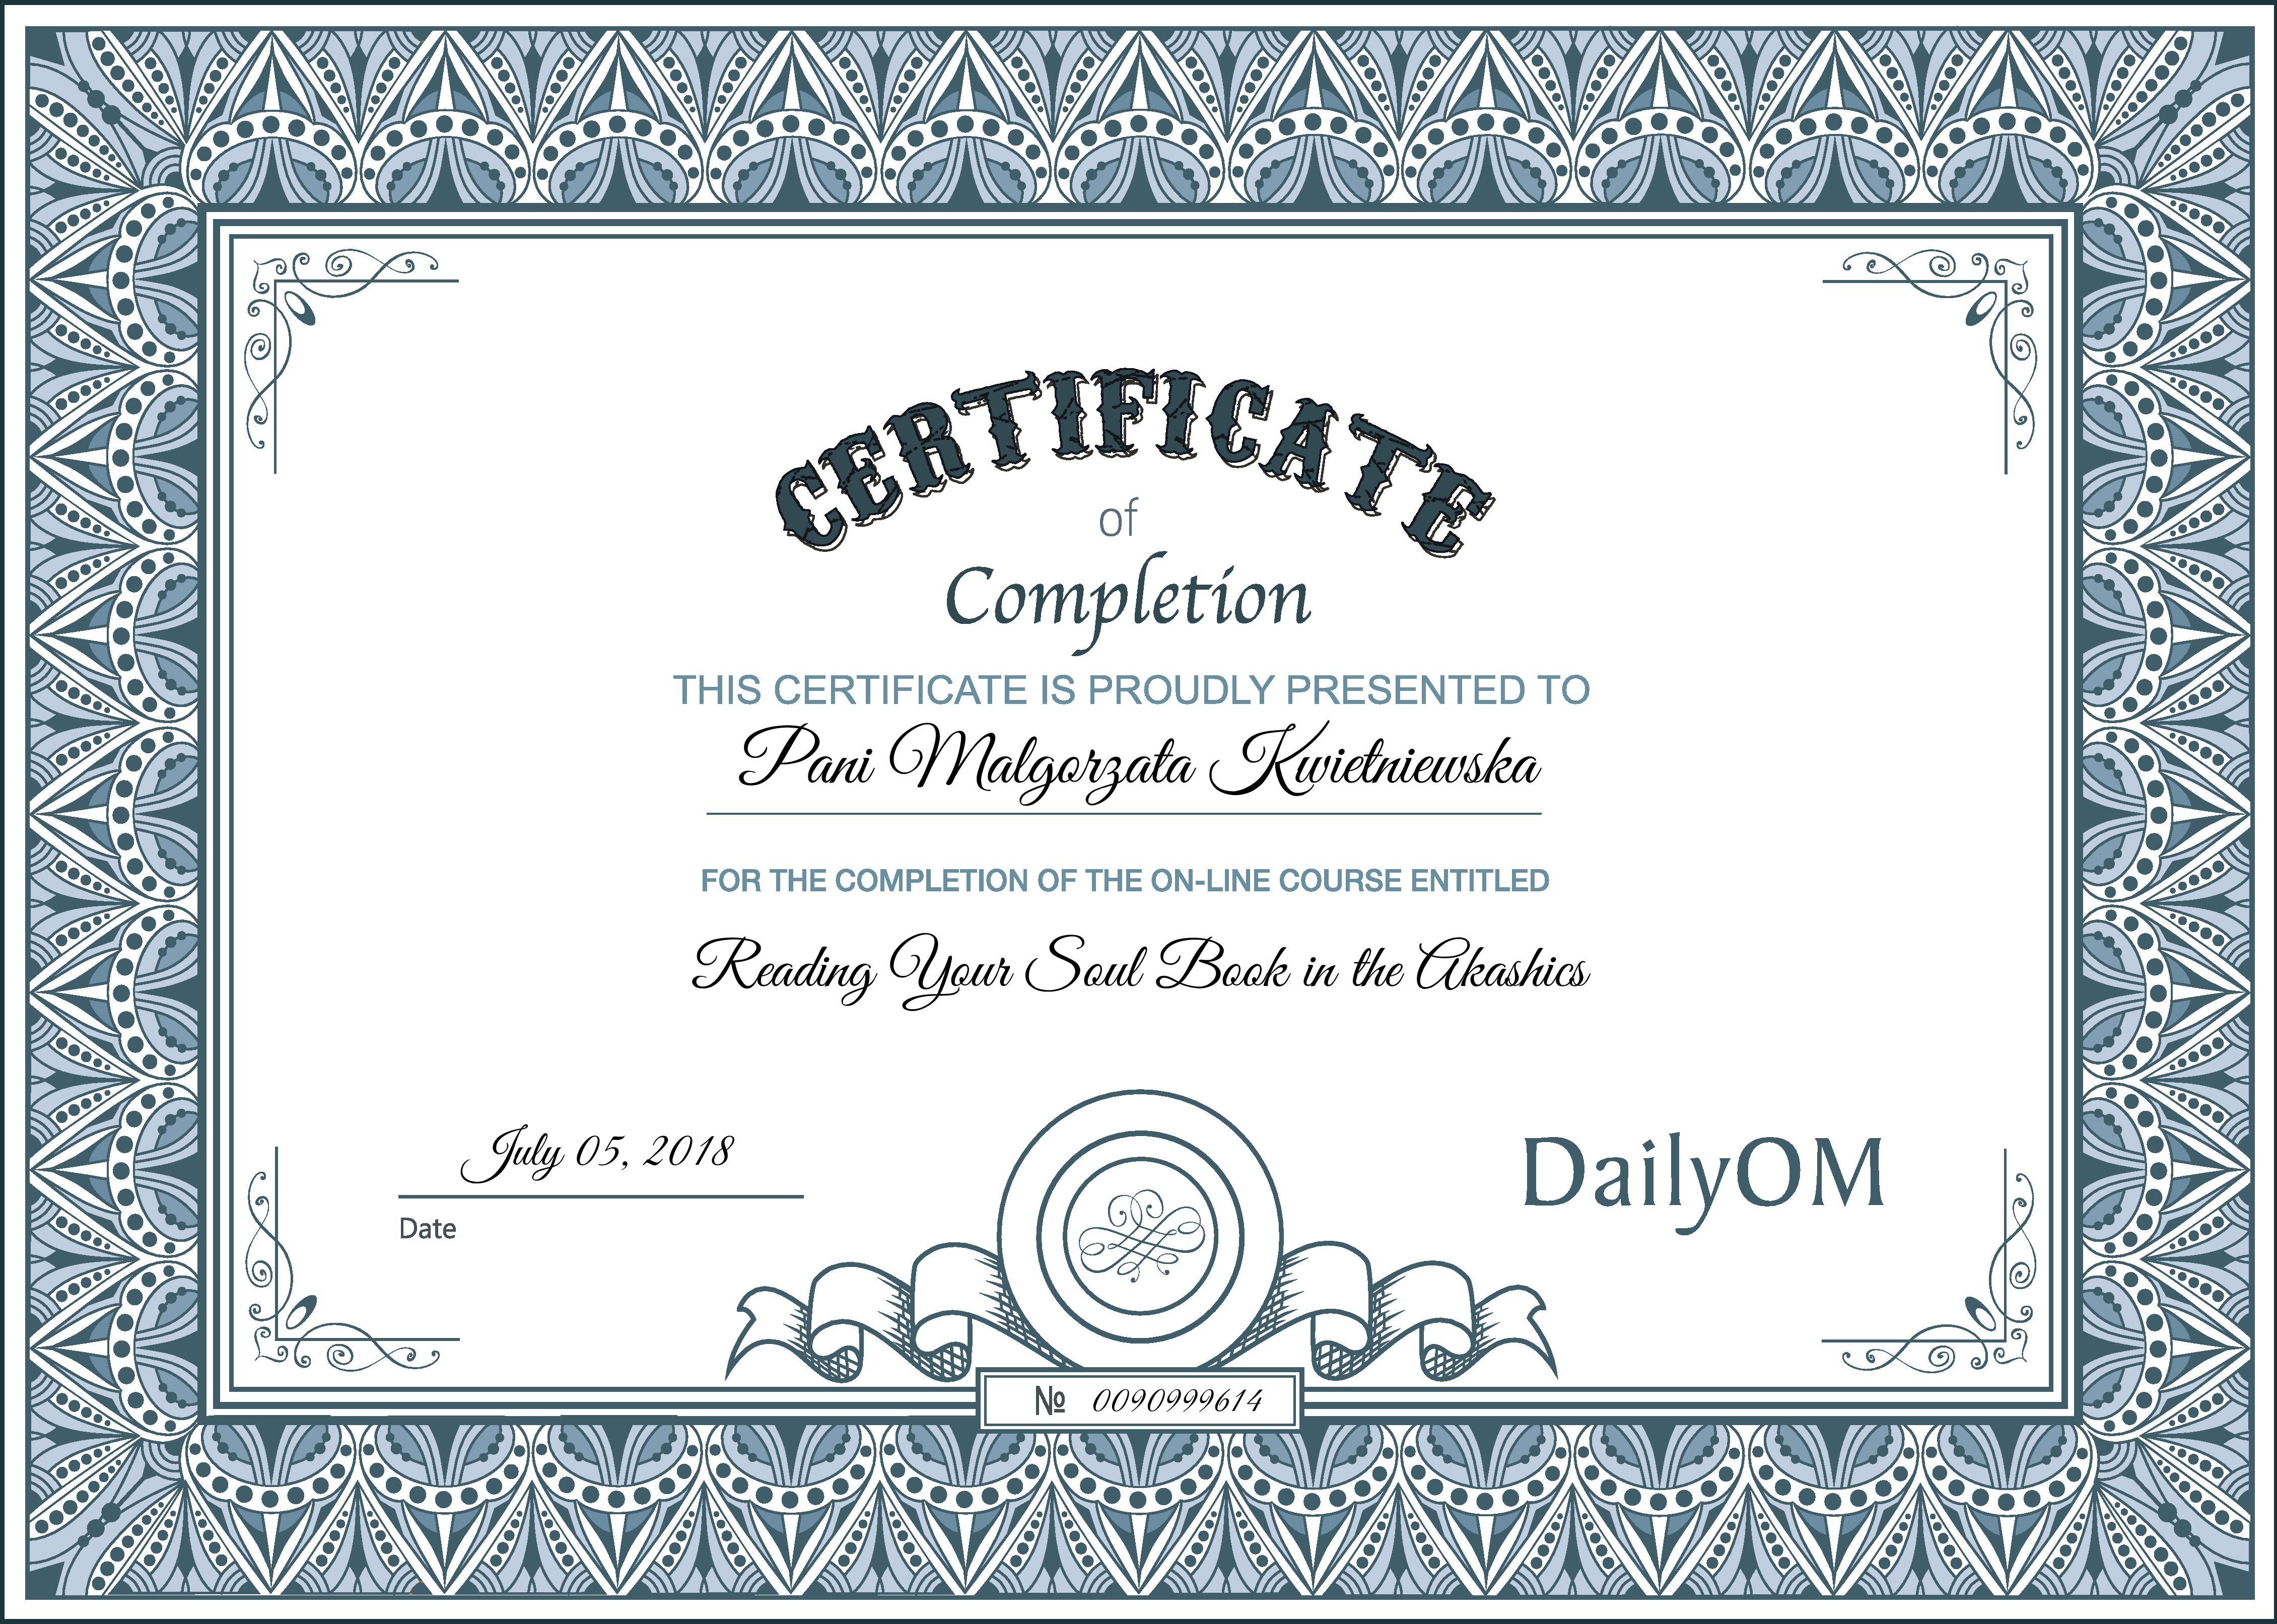 DailyOM_Certificate Soul Book-page-001